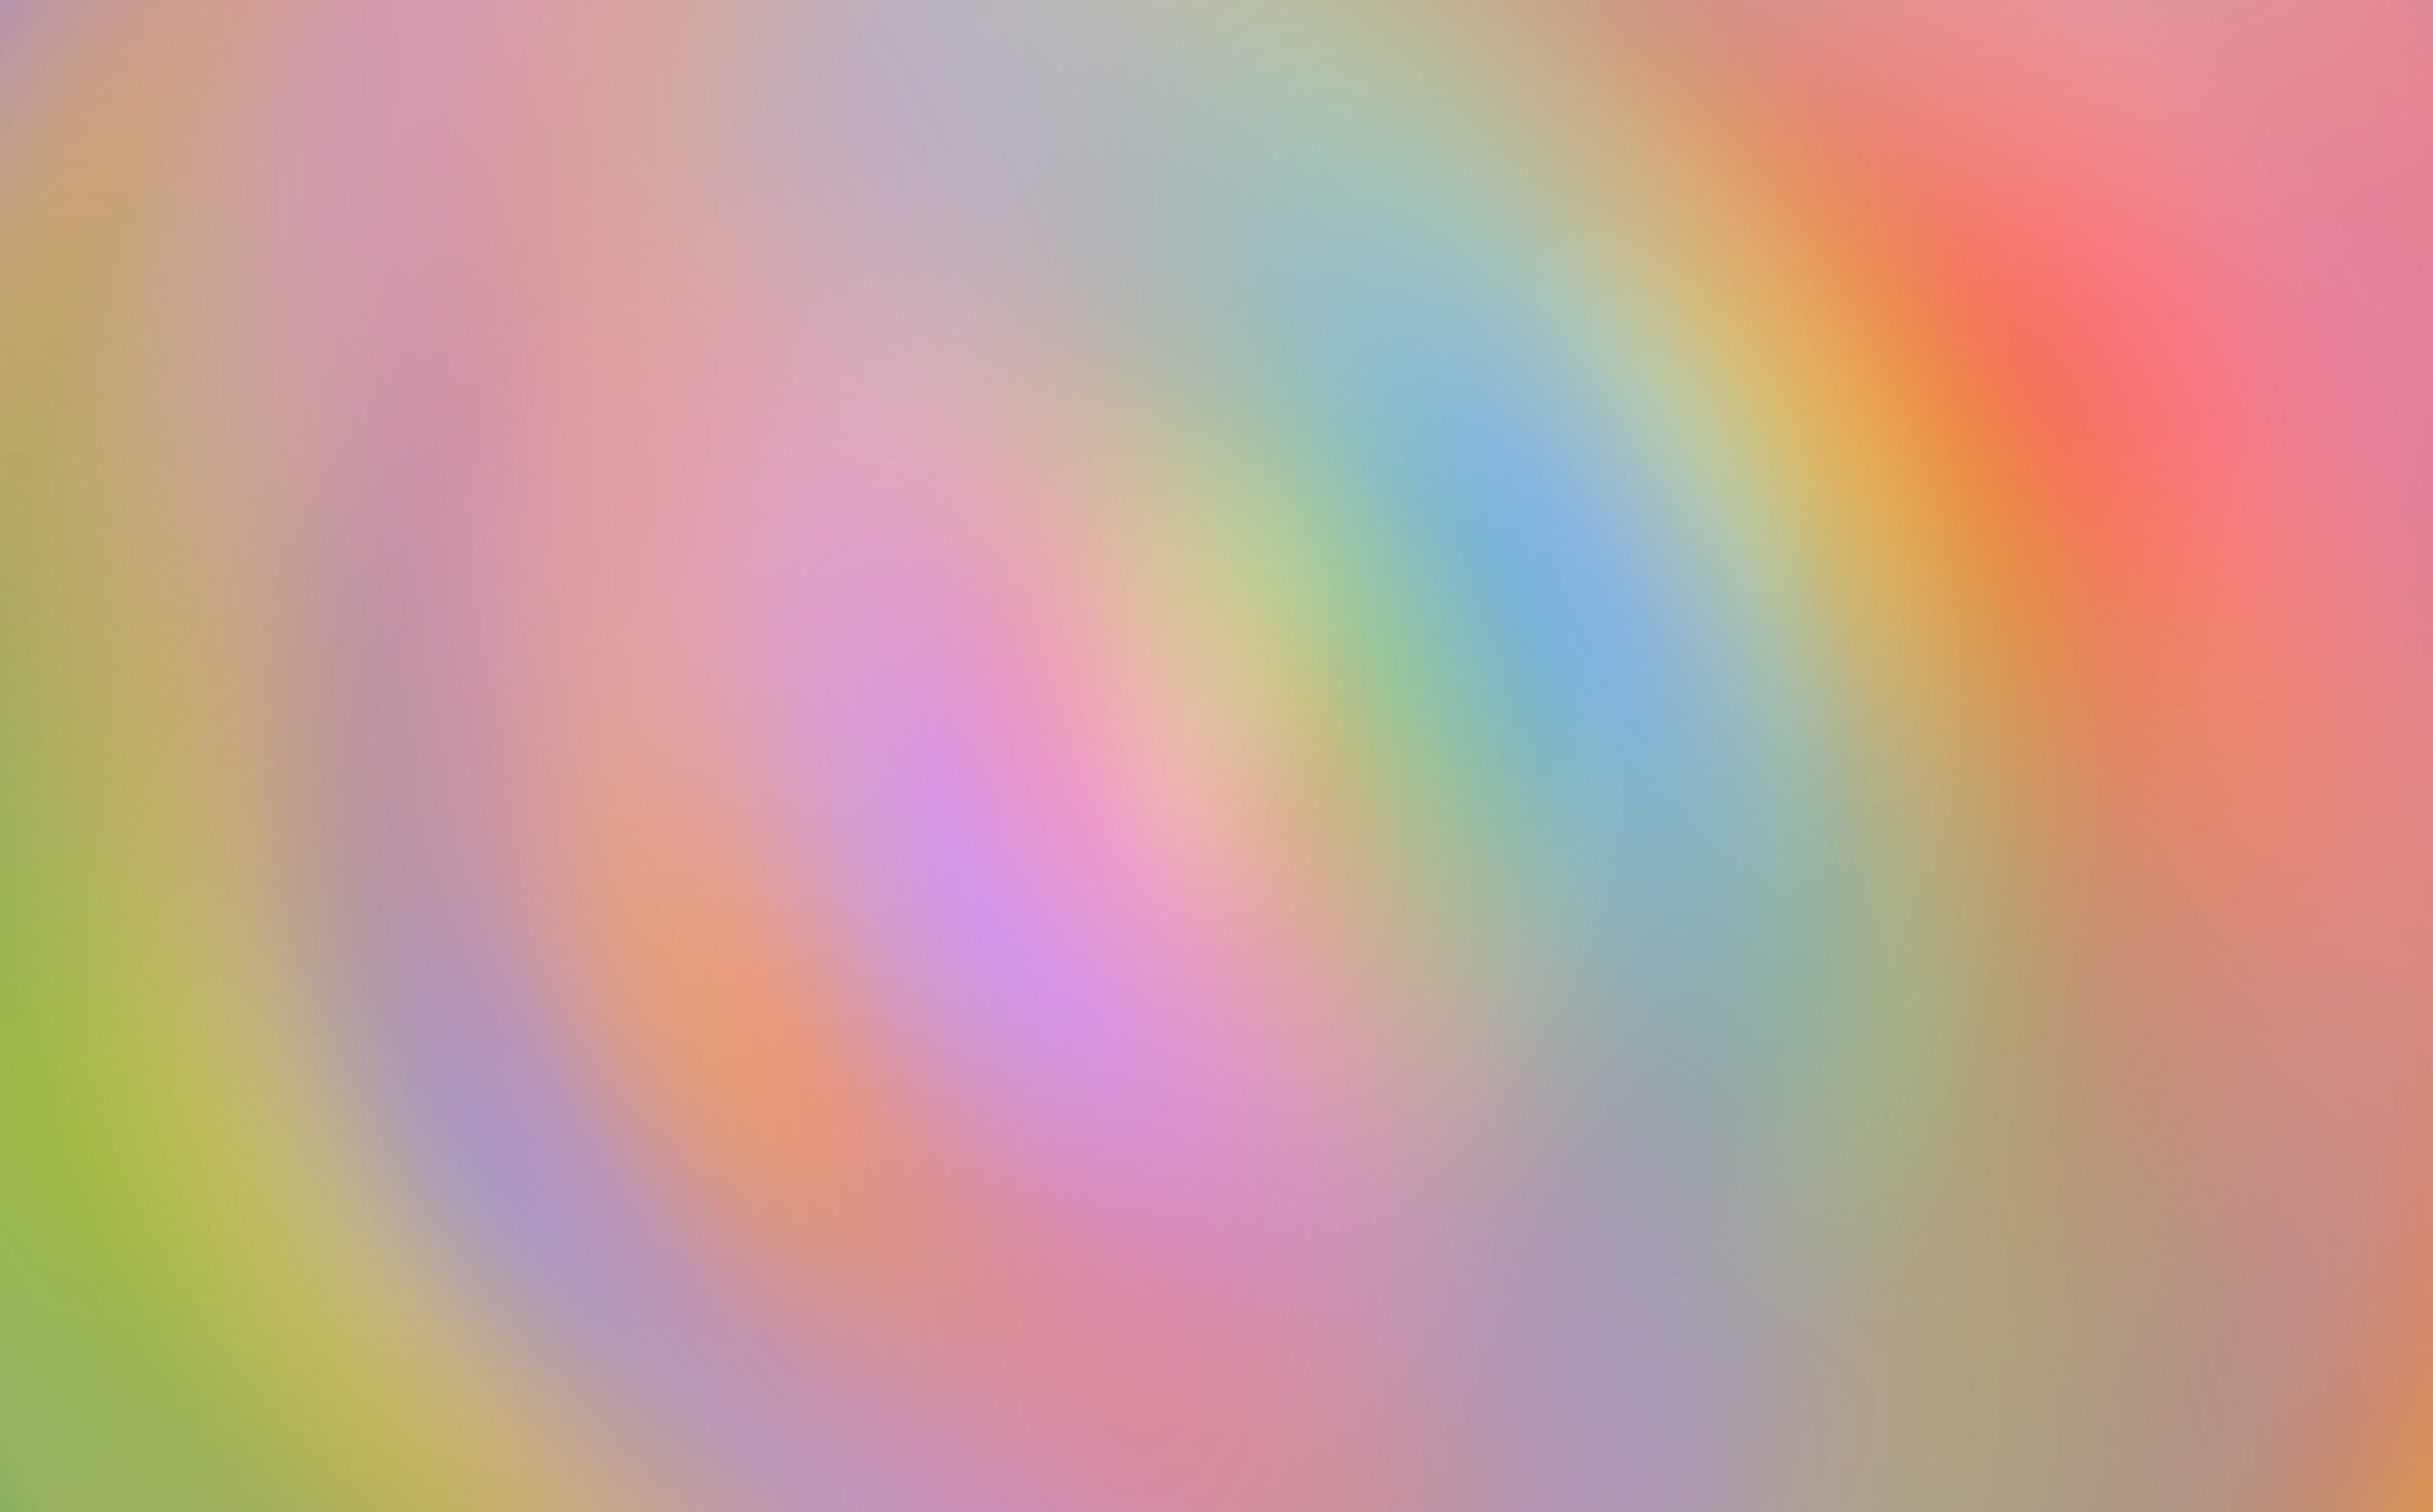 Colorful Pastel Abstract Blurred Ripple wallpaper, Aero, Rainbow, Colors